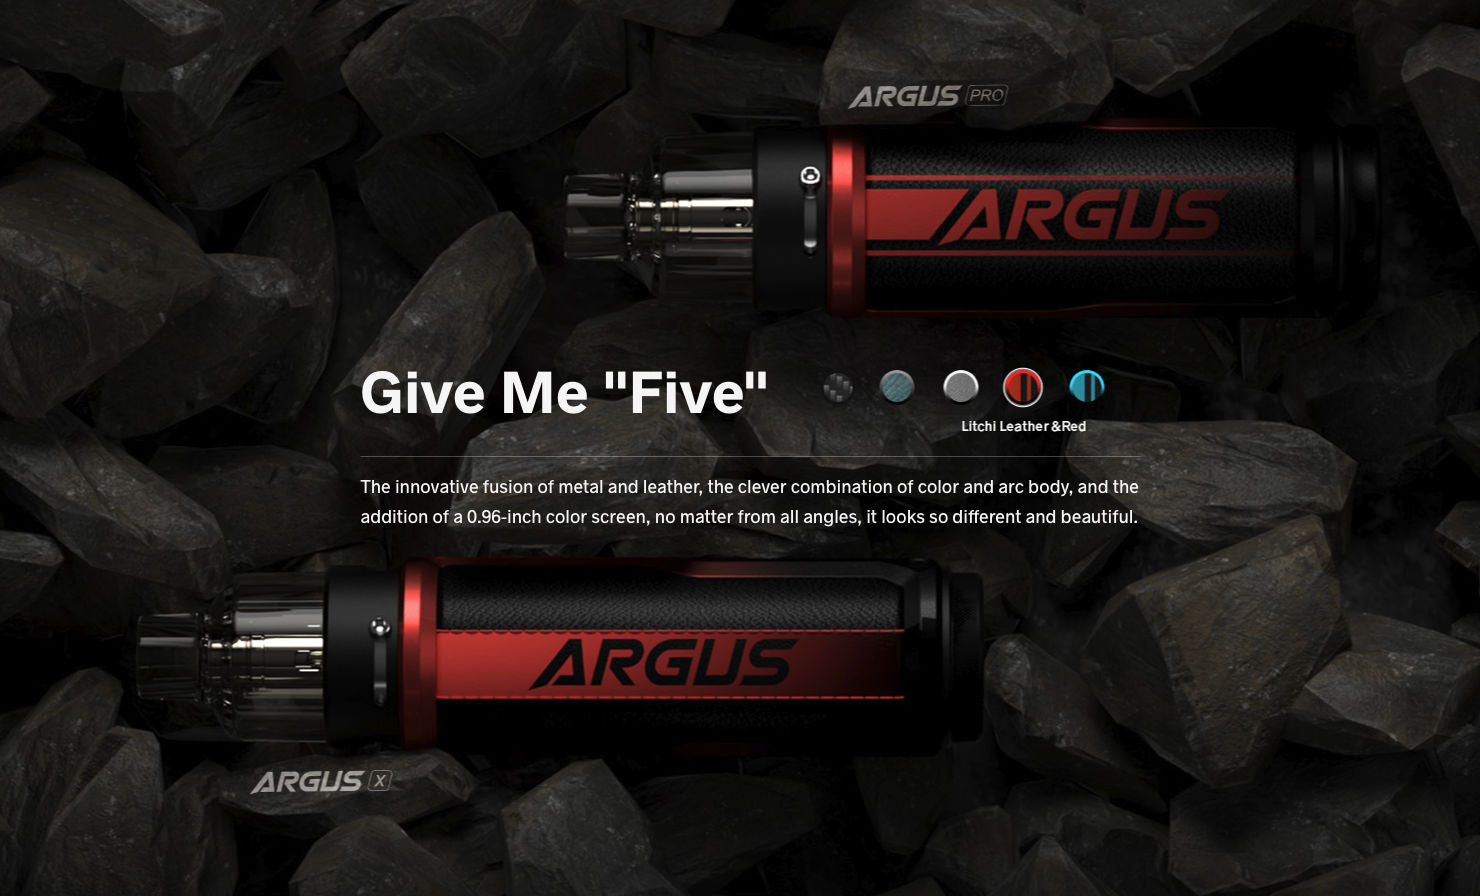 Argus PX features a great combination of metal and leather materials